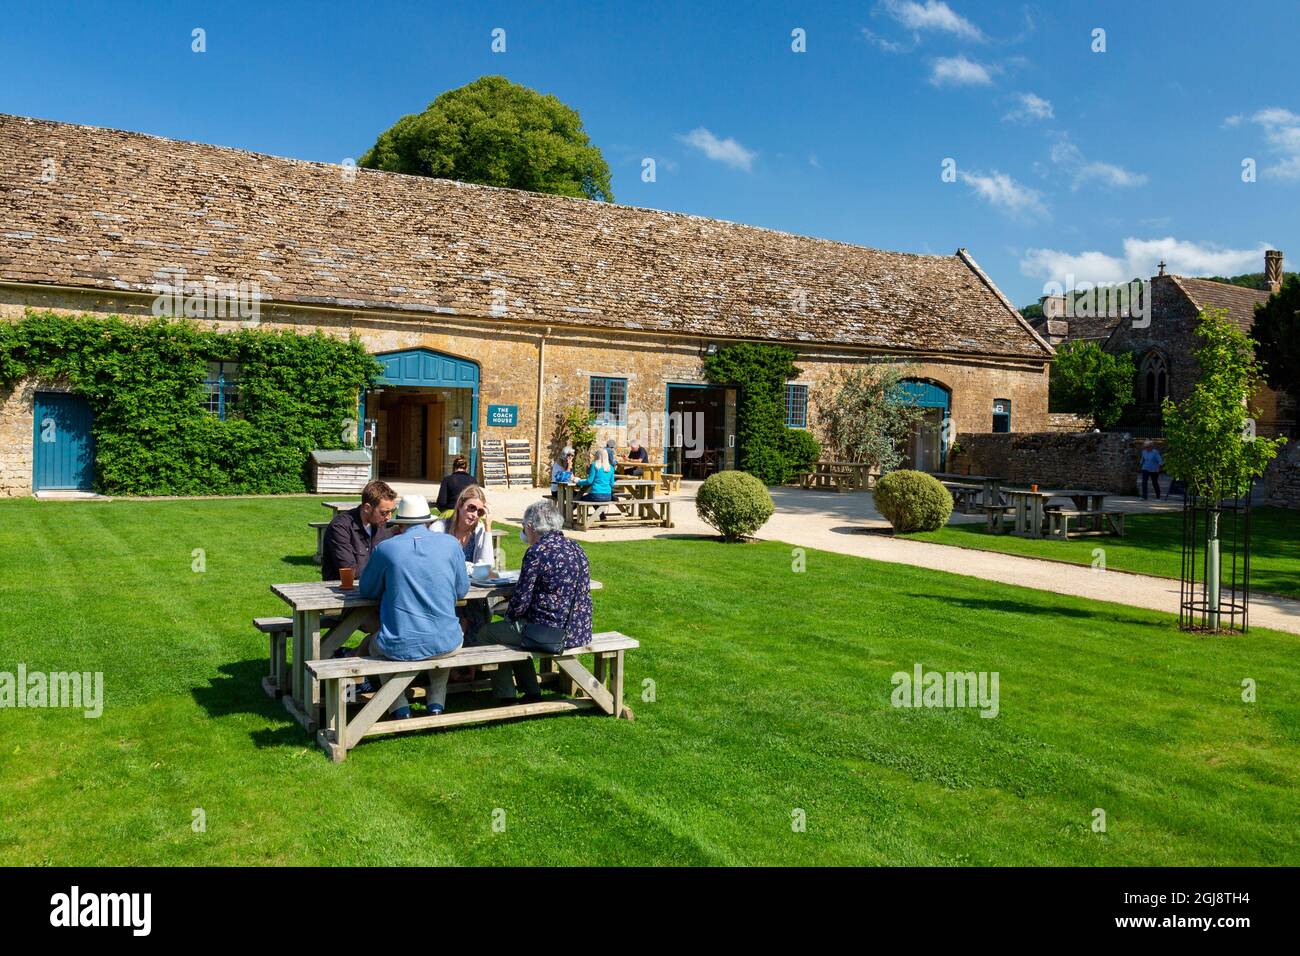 The Coach House cafe occupies an historic restored out-building at Mapperton House, Dorset, England, UK Stock Photo